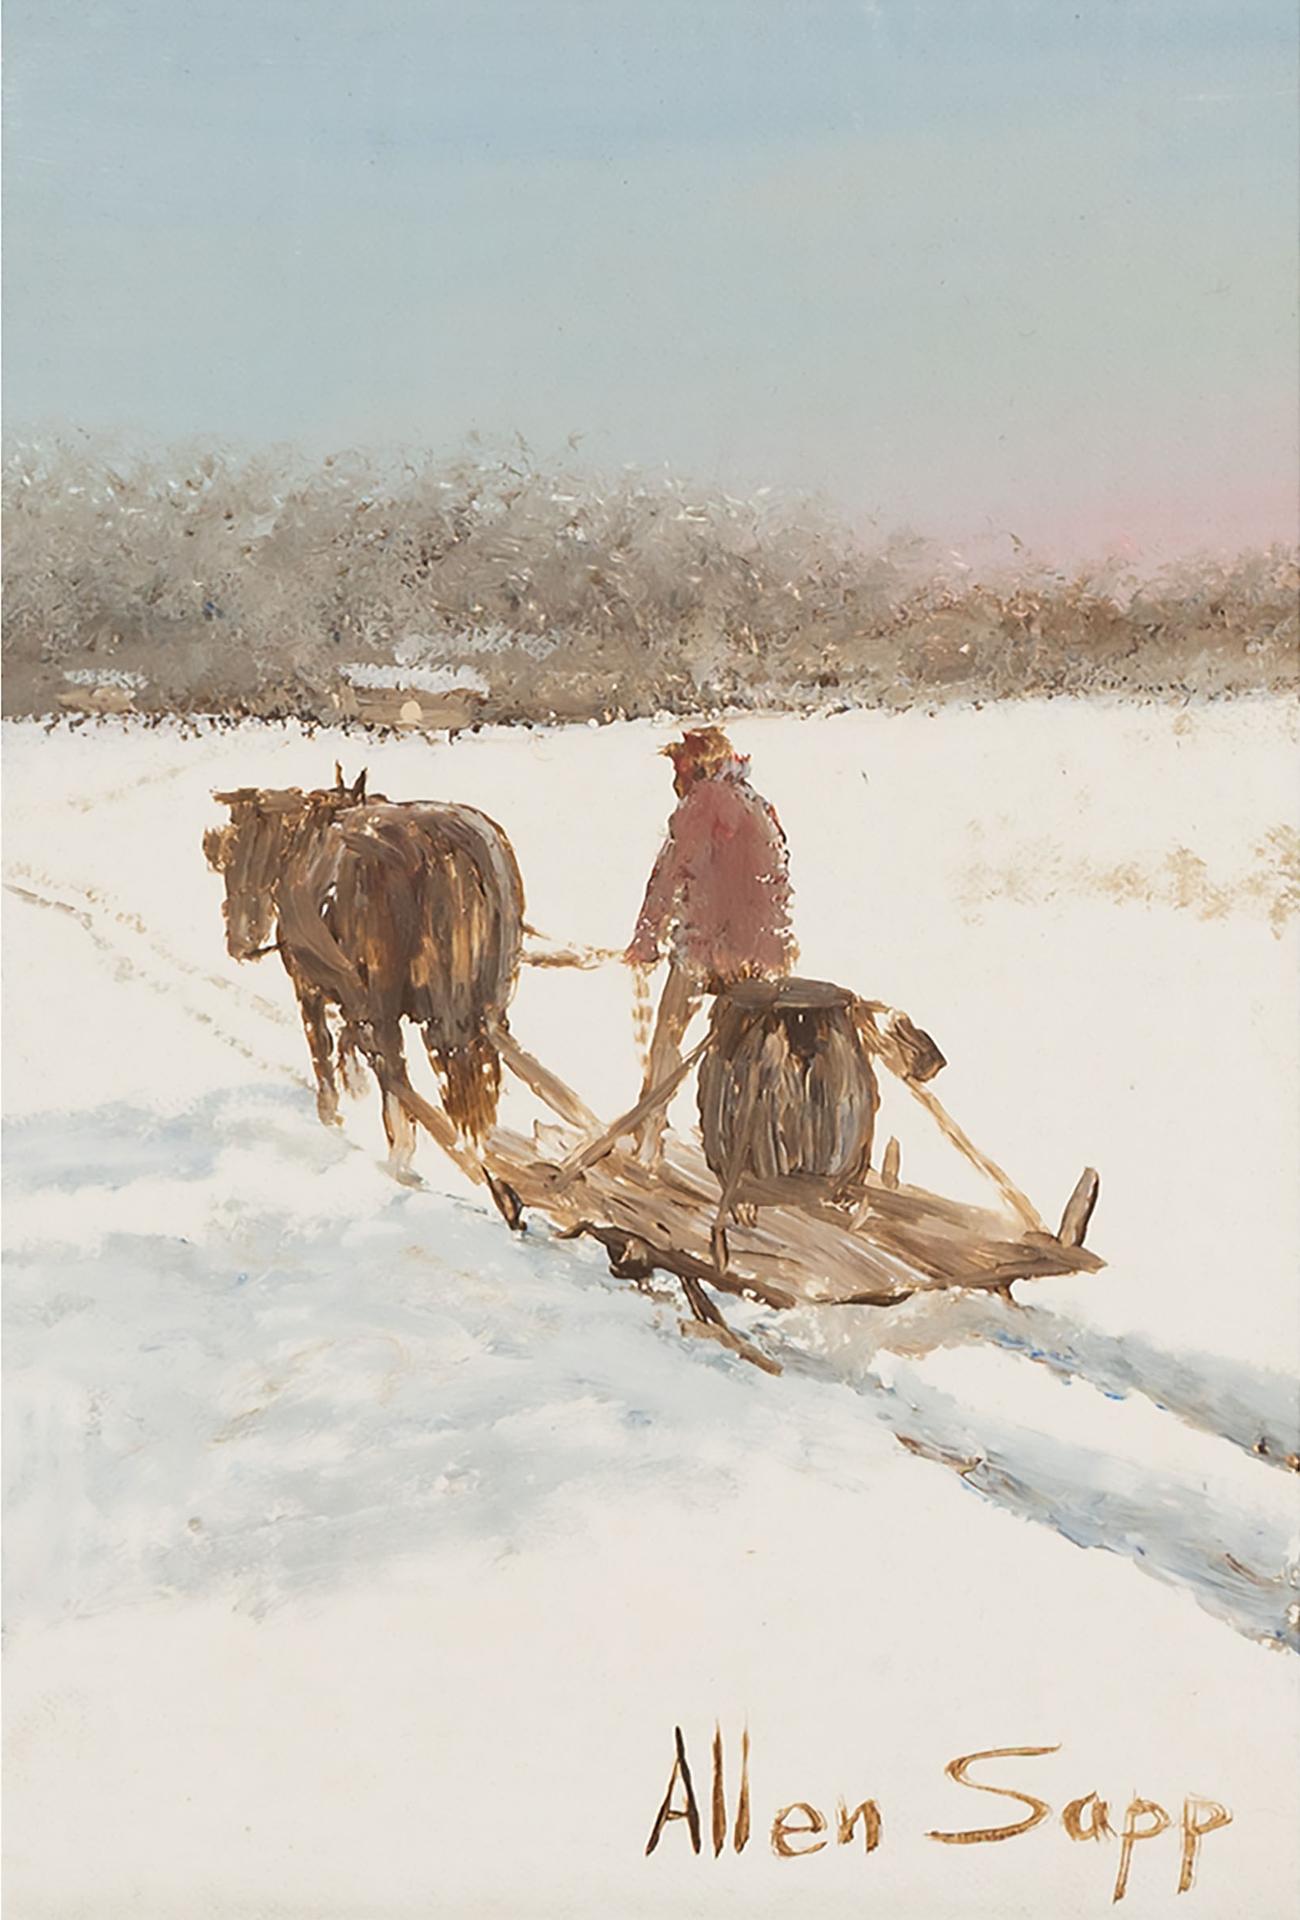 Allen Fredrick Sapp (1929-2015) - Untitled (Ploughing In The Snow)